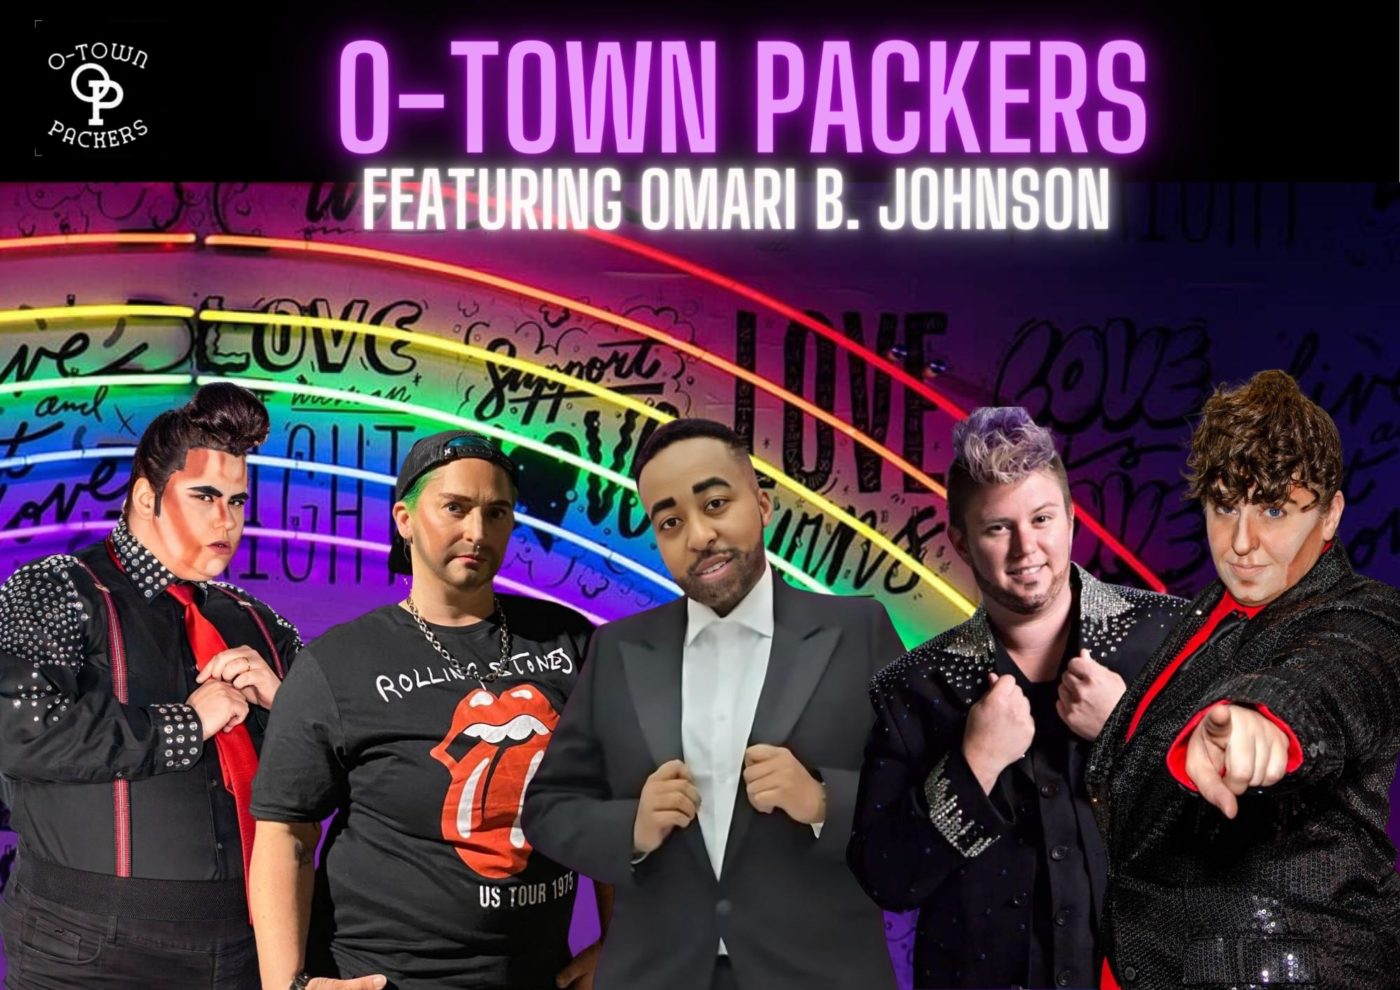 O-Town Packers